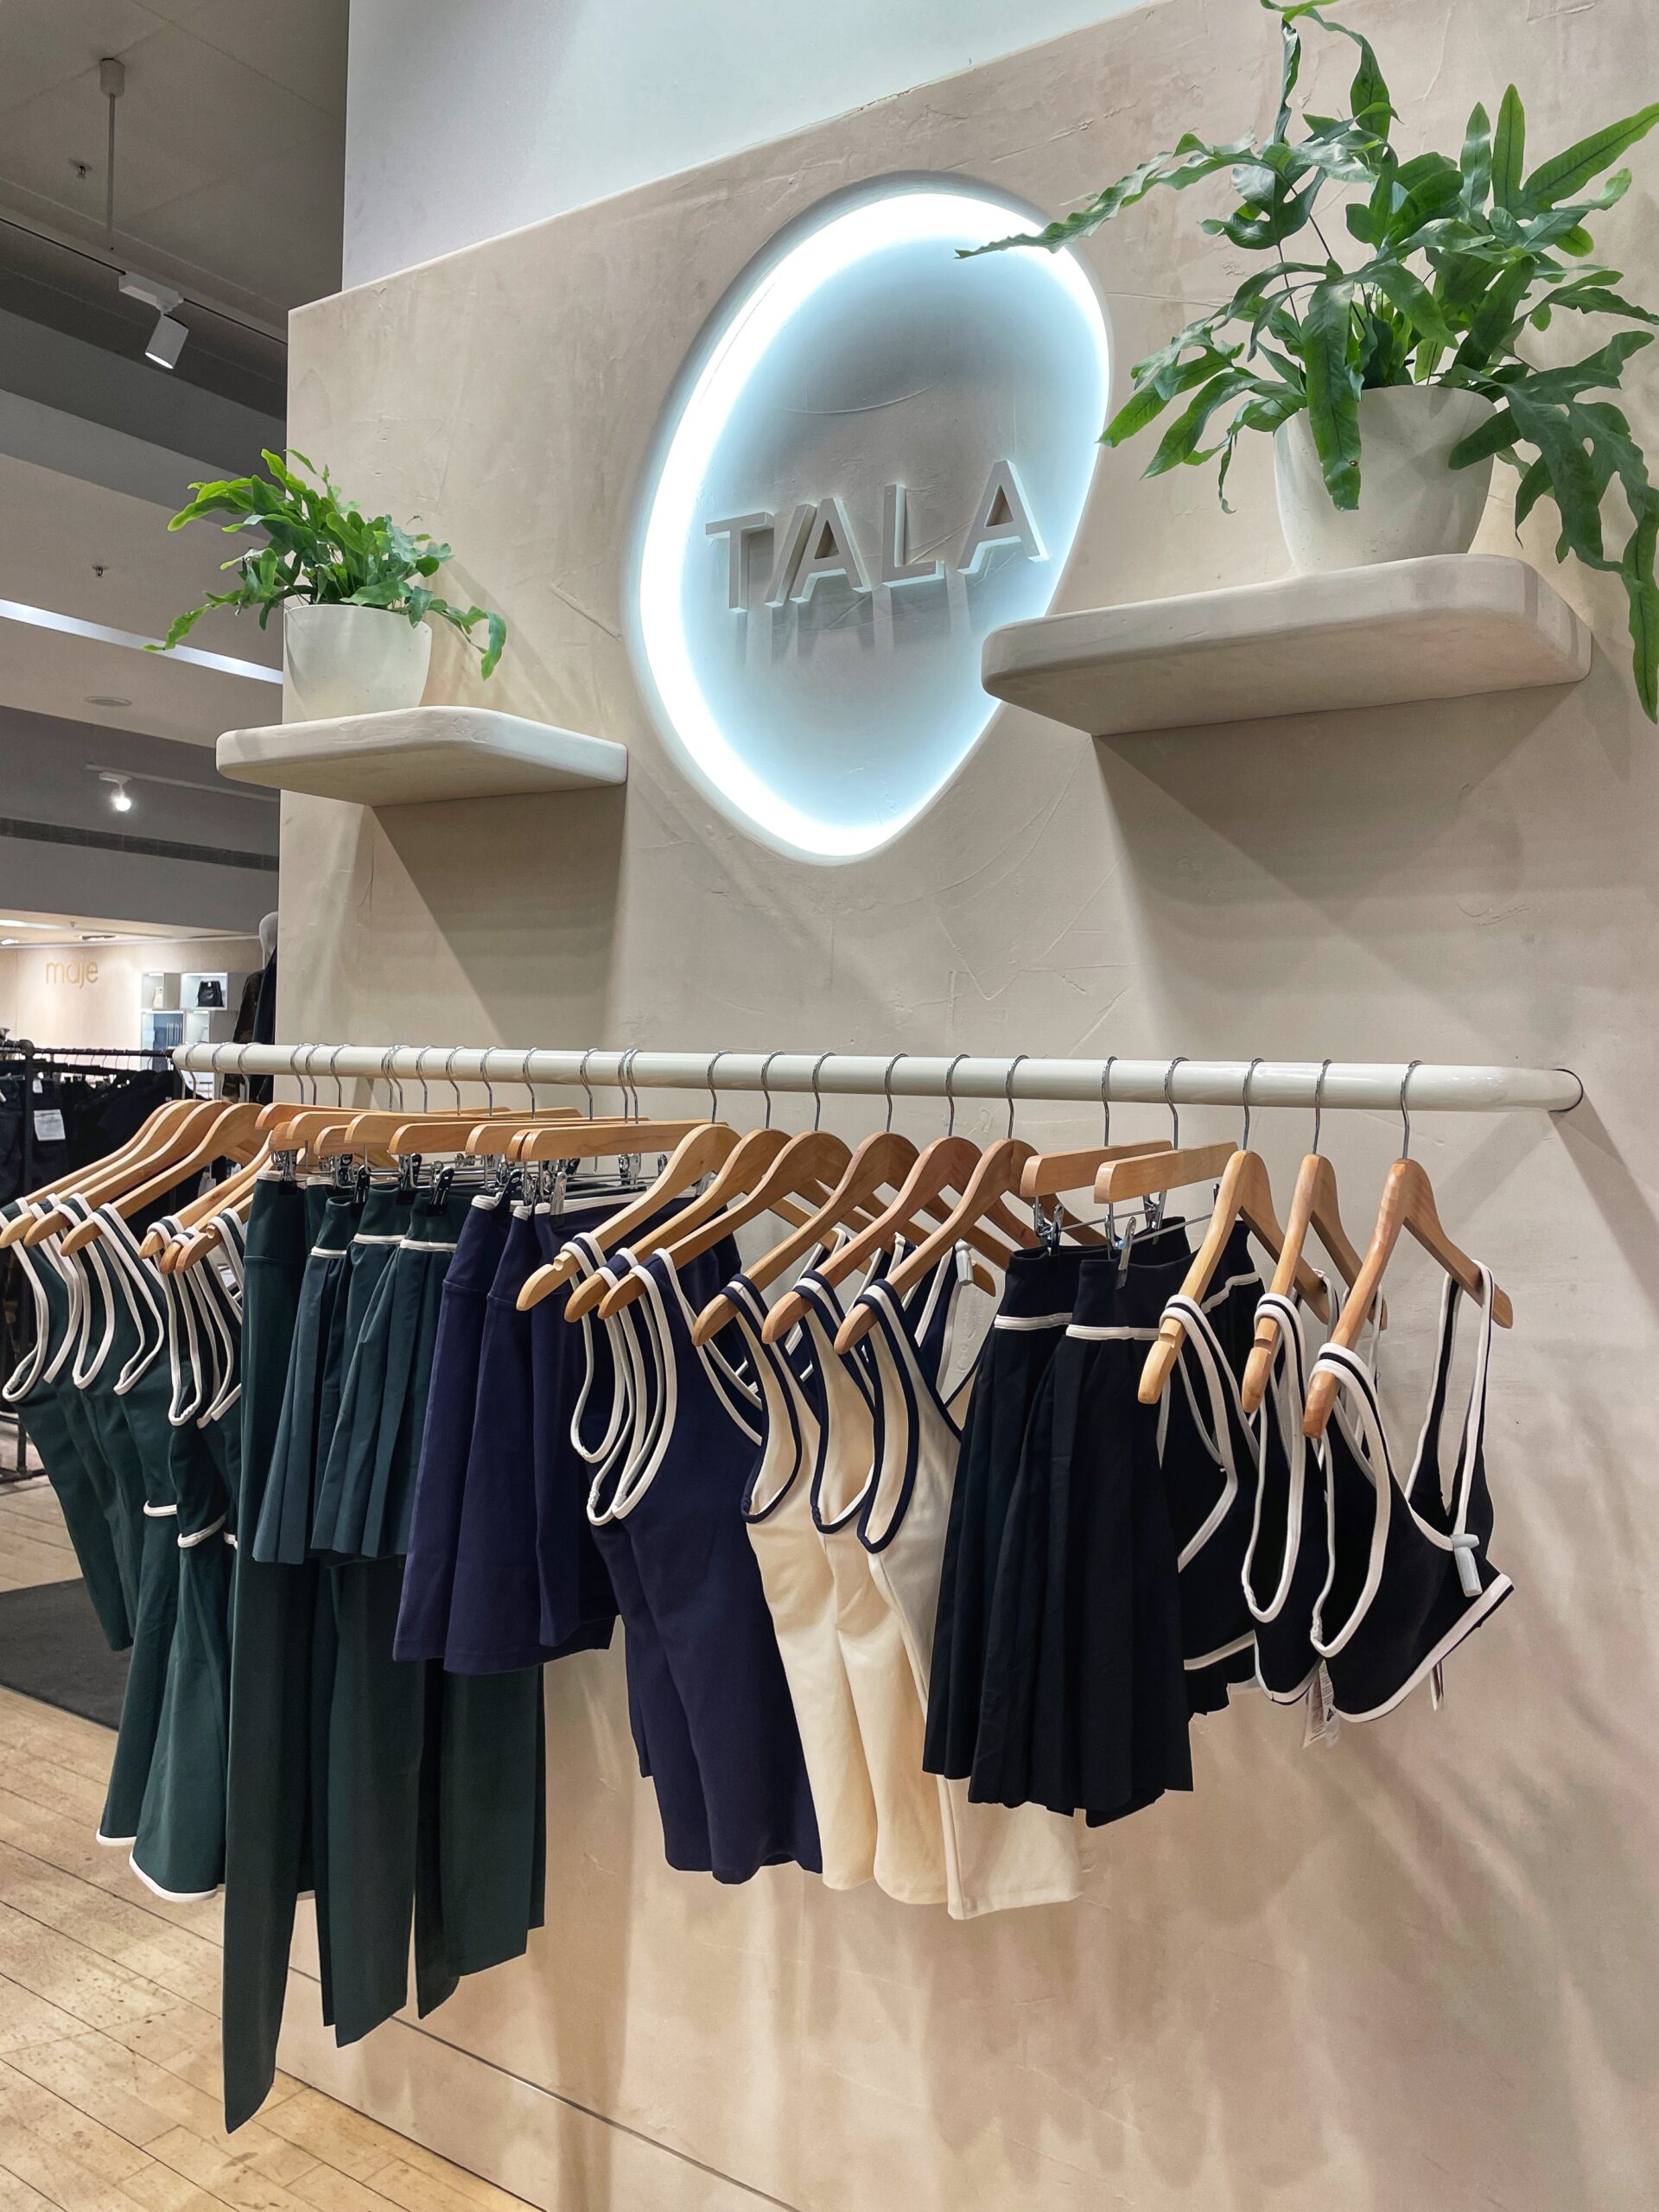 Tala's range of athleisure is now available to browse in Selfridges in Manchester